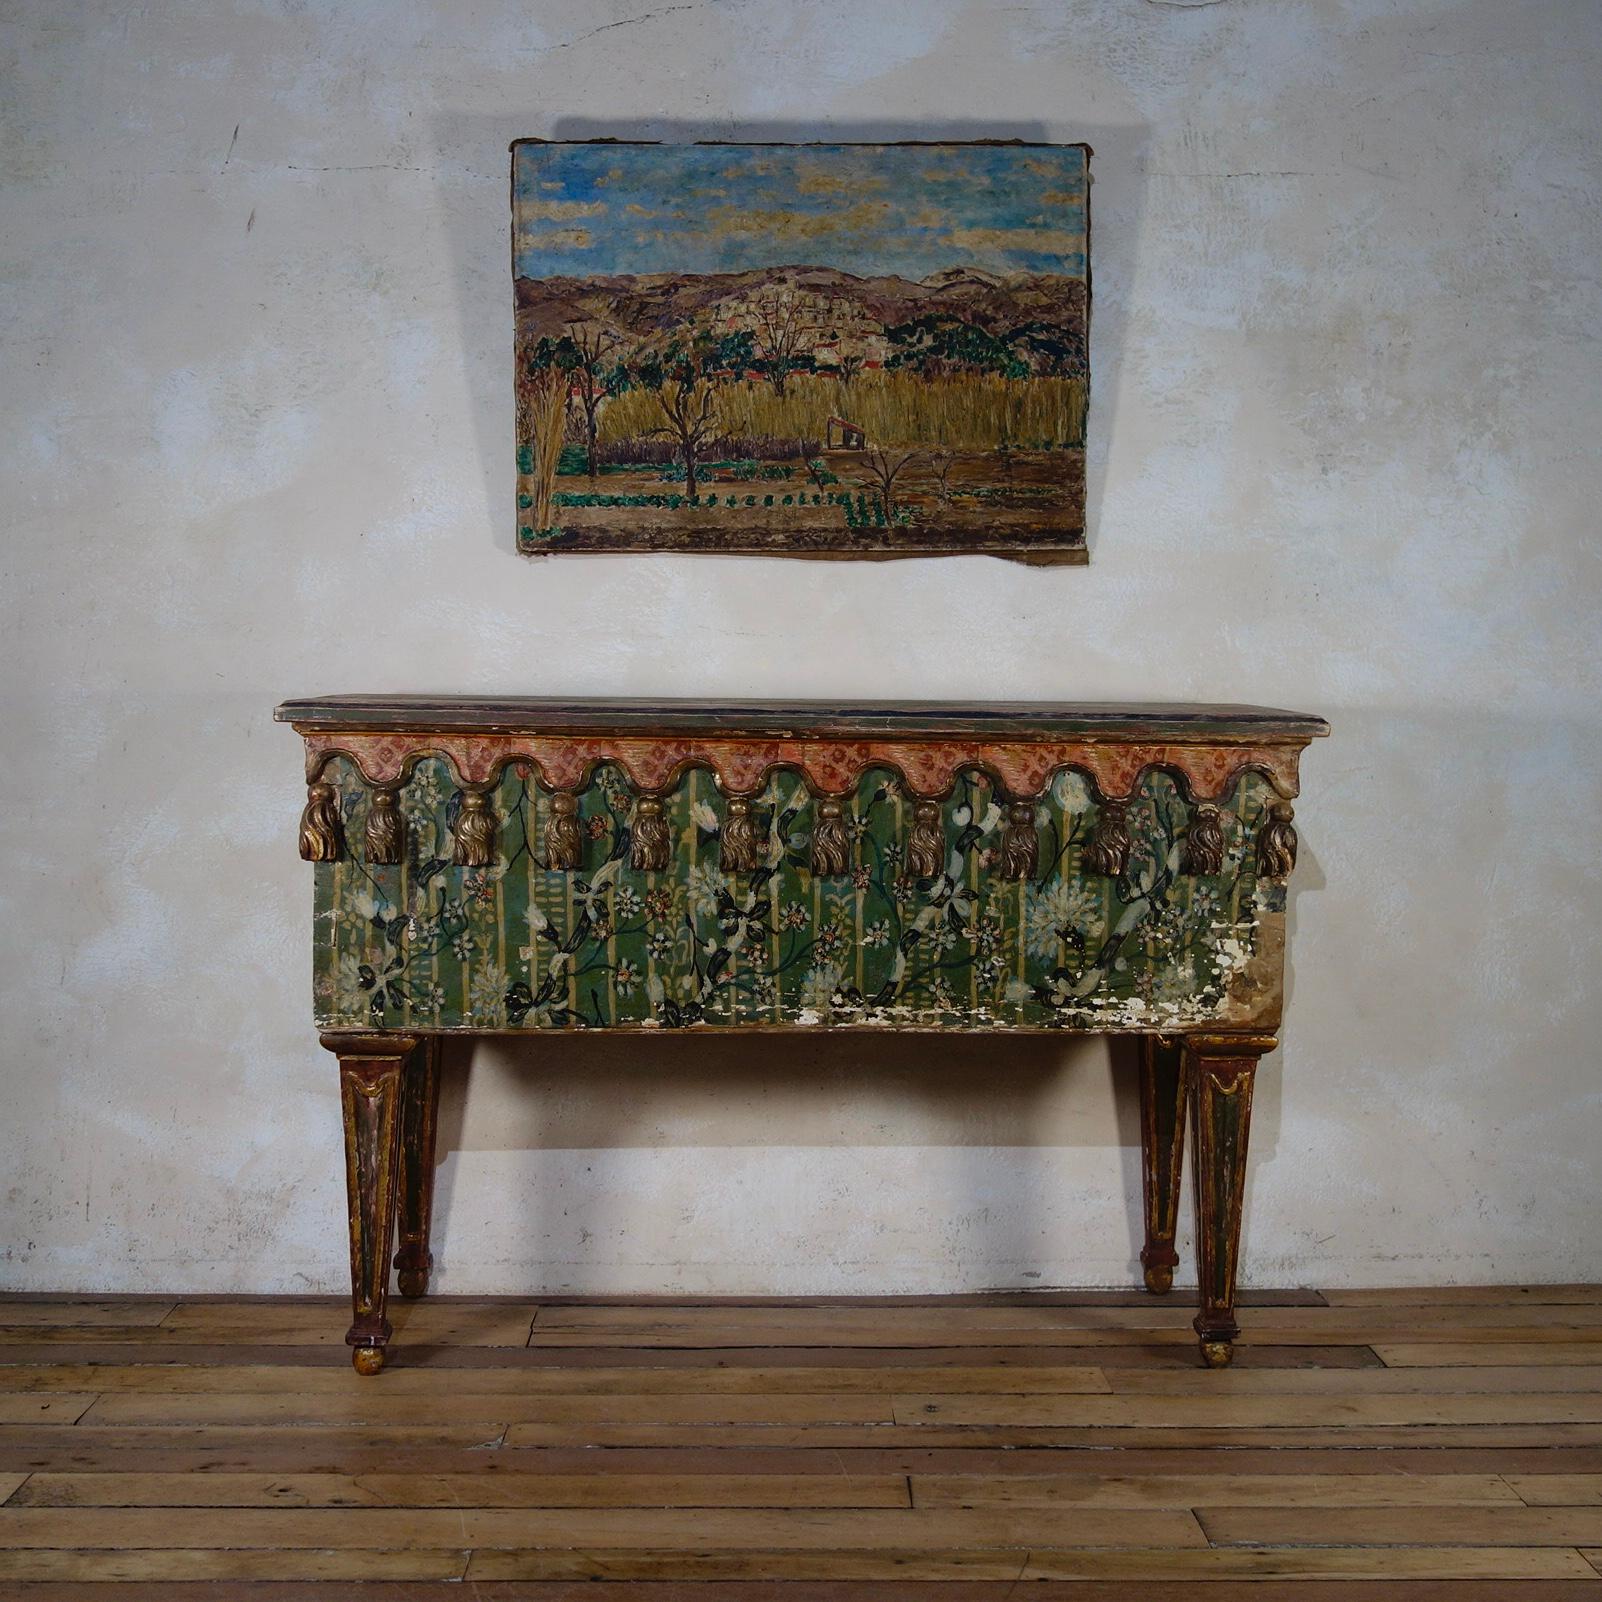 A unique and highly decorative early 19th century Italian original painted console table. Displaying incredibly charming faux painted fabric to the top and body with further carved gilded tassels to the body. Raised on tapering legs terminating on